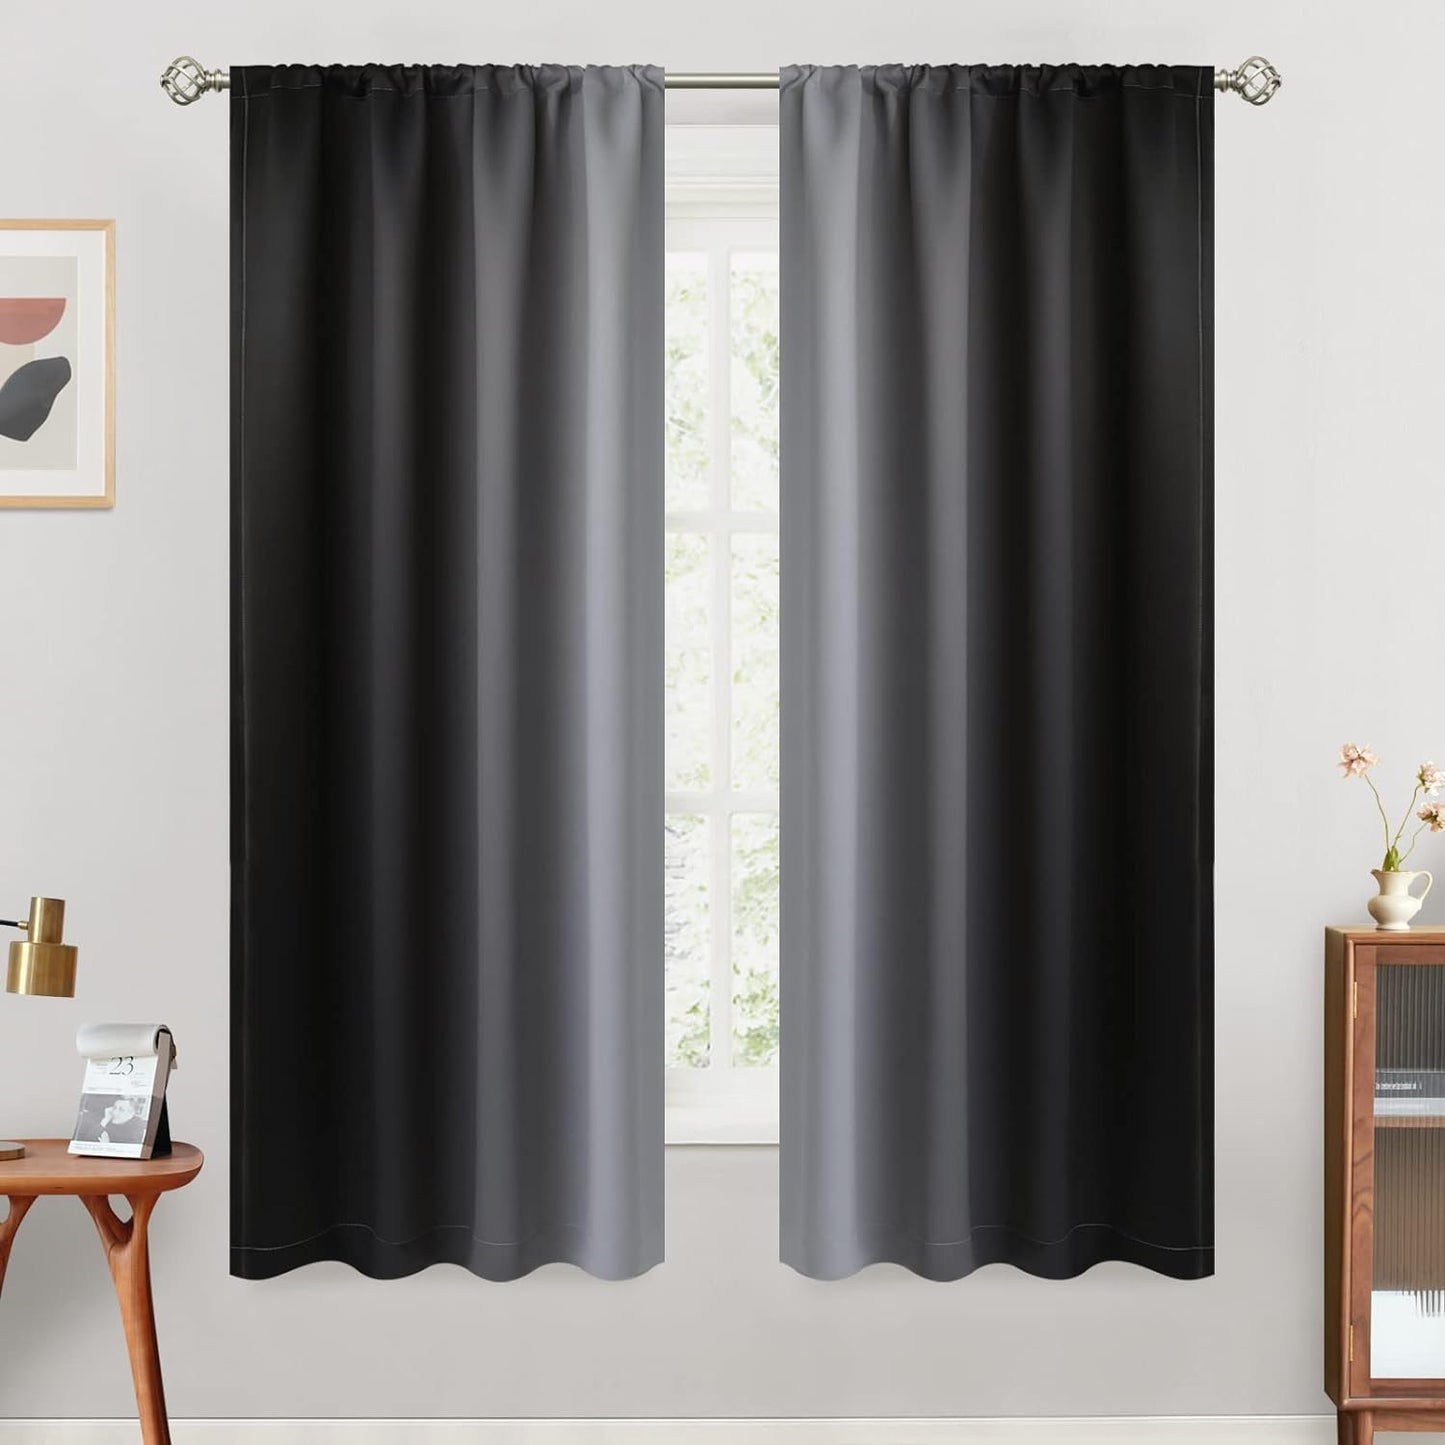 Simplehome Ombre Room Darkening Curtains for Bedroom, Light Blocking Gradient Purple to Greyish White Thermal Insulated Rod Pocket Window Curtains Drapes for Living Room,2 Panels, 52X84 Inches Length  SimpleHome Black 42W X 63L / 2 Panels 